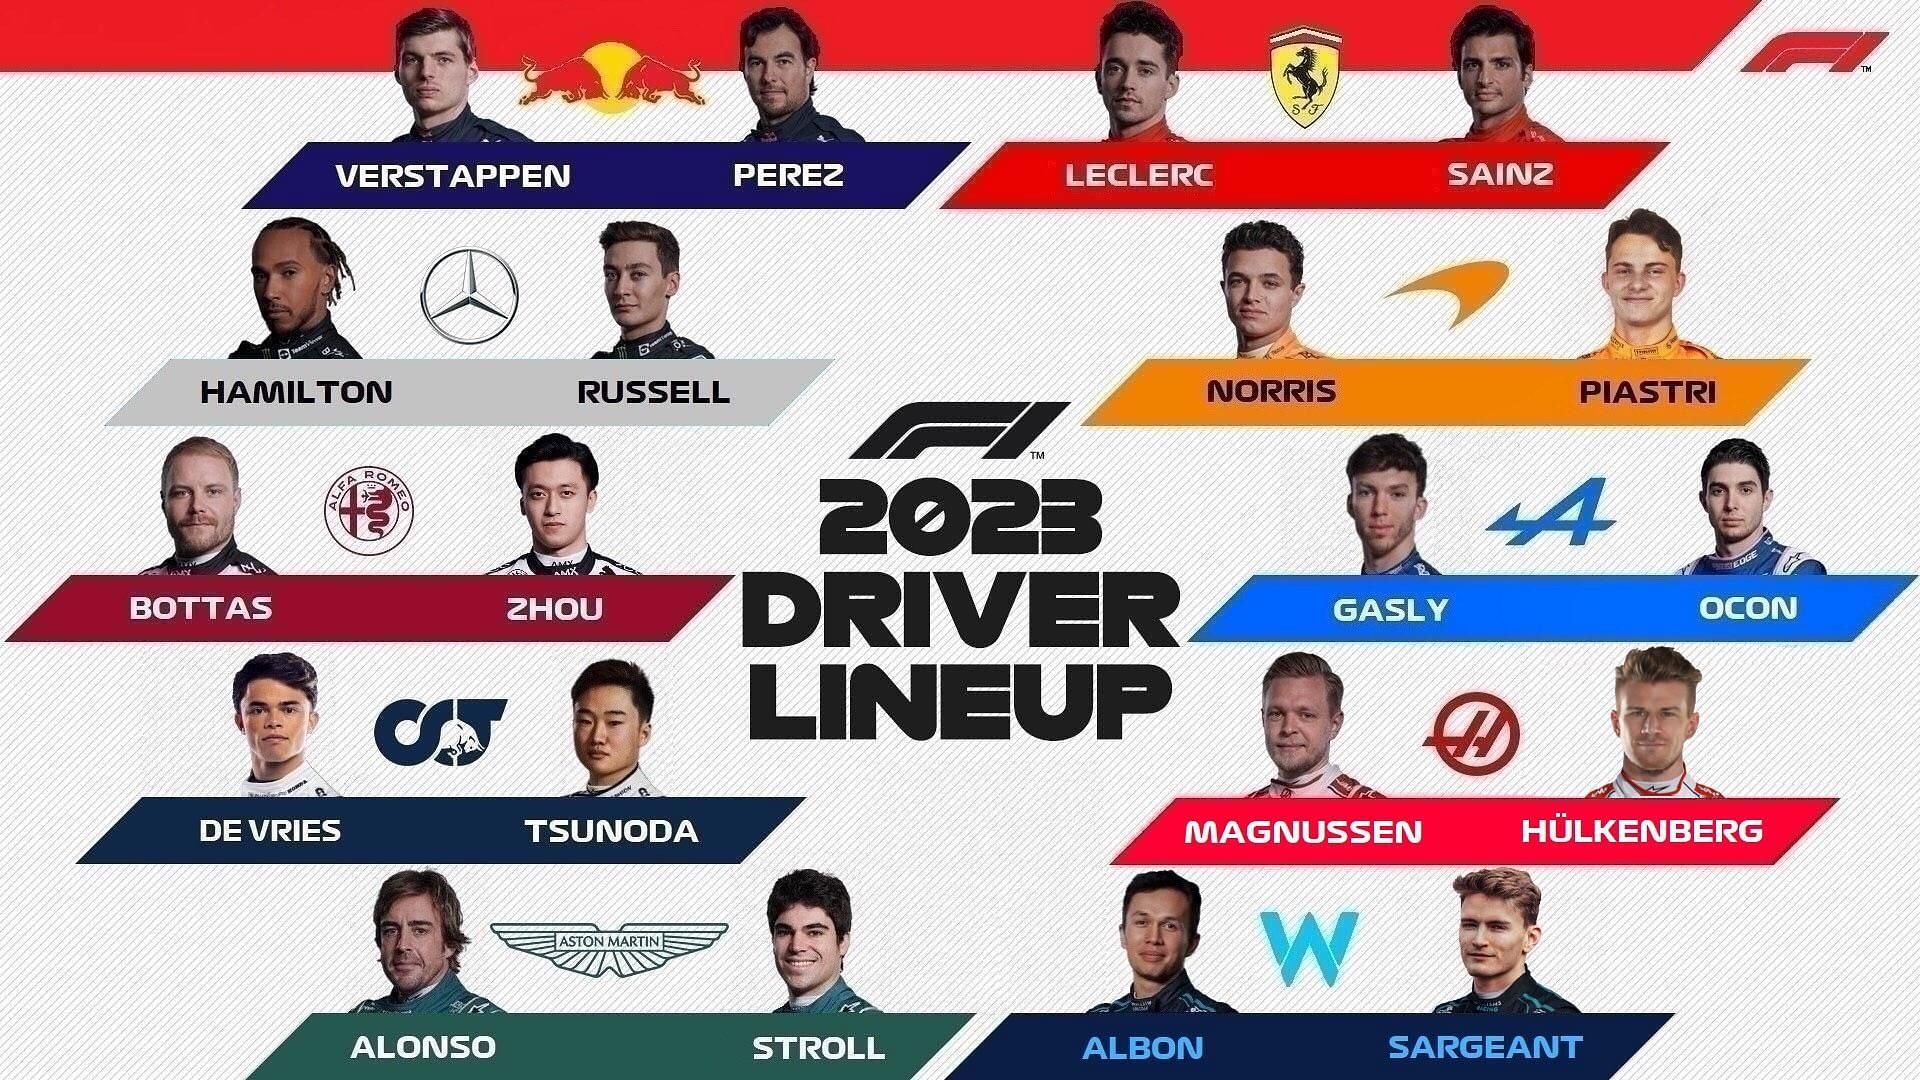 The 2023 F1 grid, just like any other thing in life, is not perfect